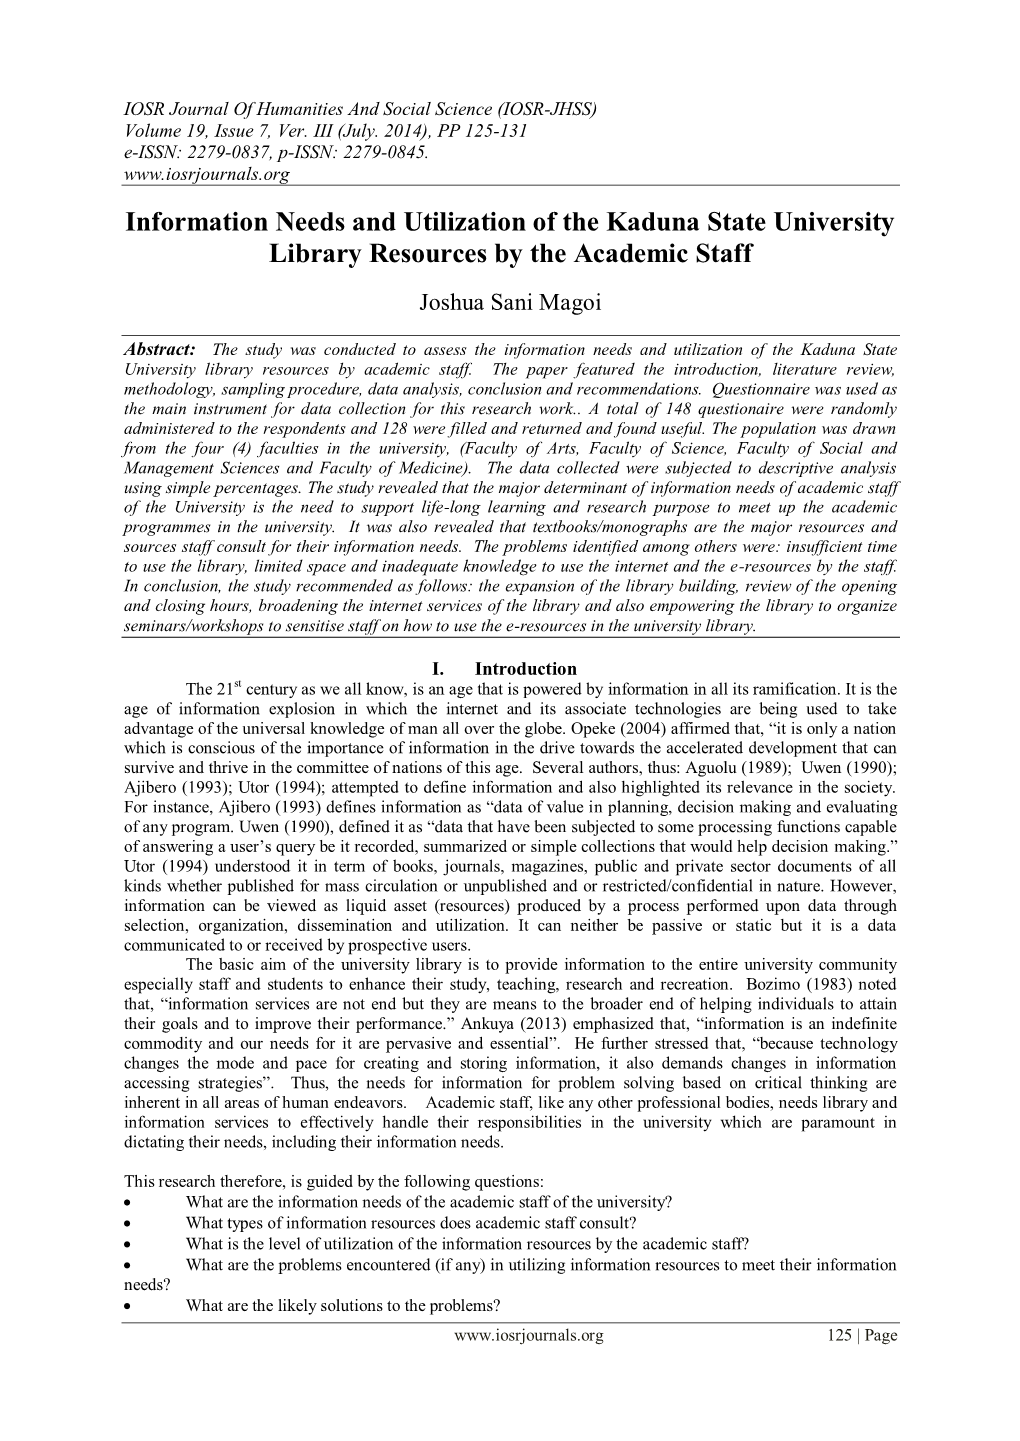 Information Needs and Utilization of the Kaduna State University Library Resources by the Academic Staff